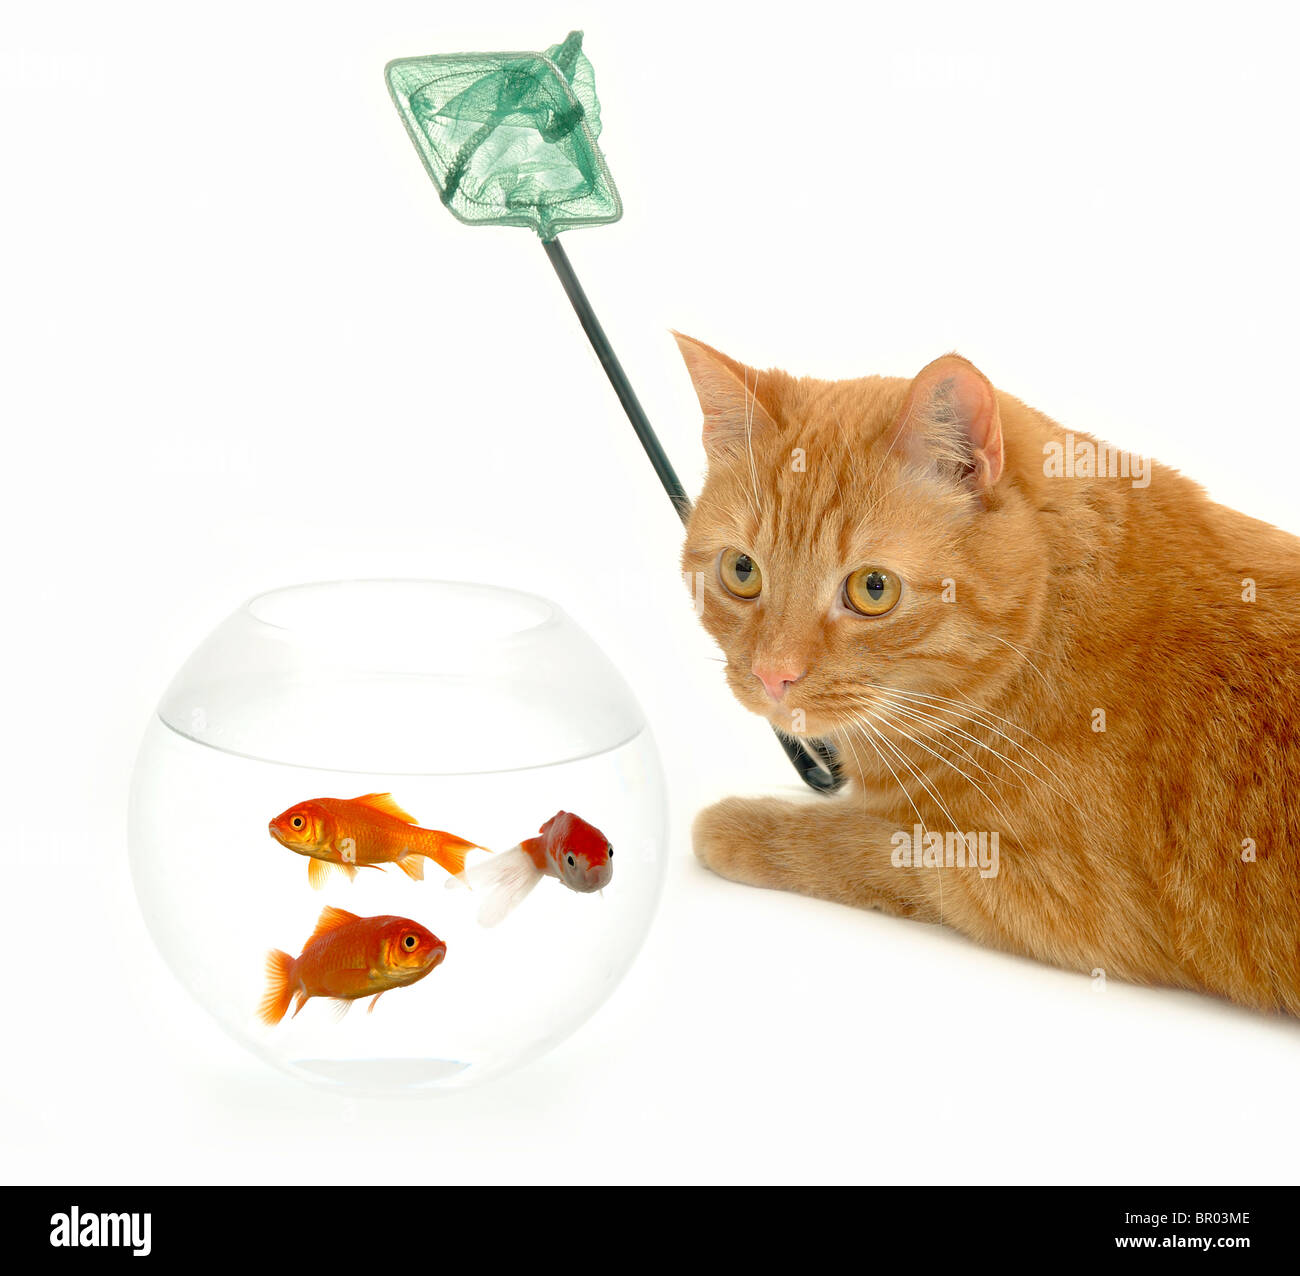 https://c8.alamy.com/comp/BR03ME/cat-is-holding-a-net-ready-to-catch-fish-isolated-on-a-white-background-BR03ME.jpg